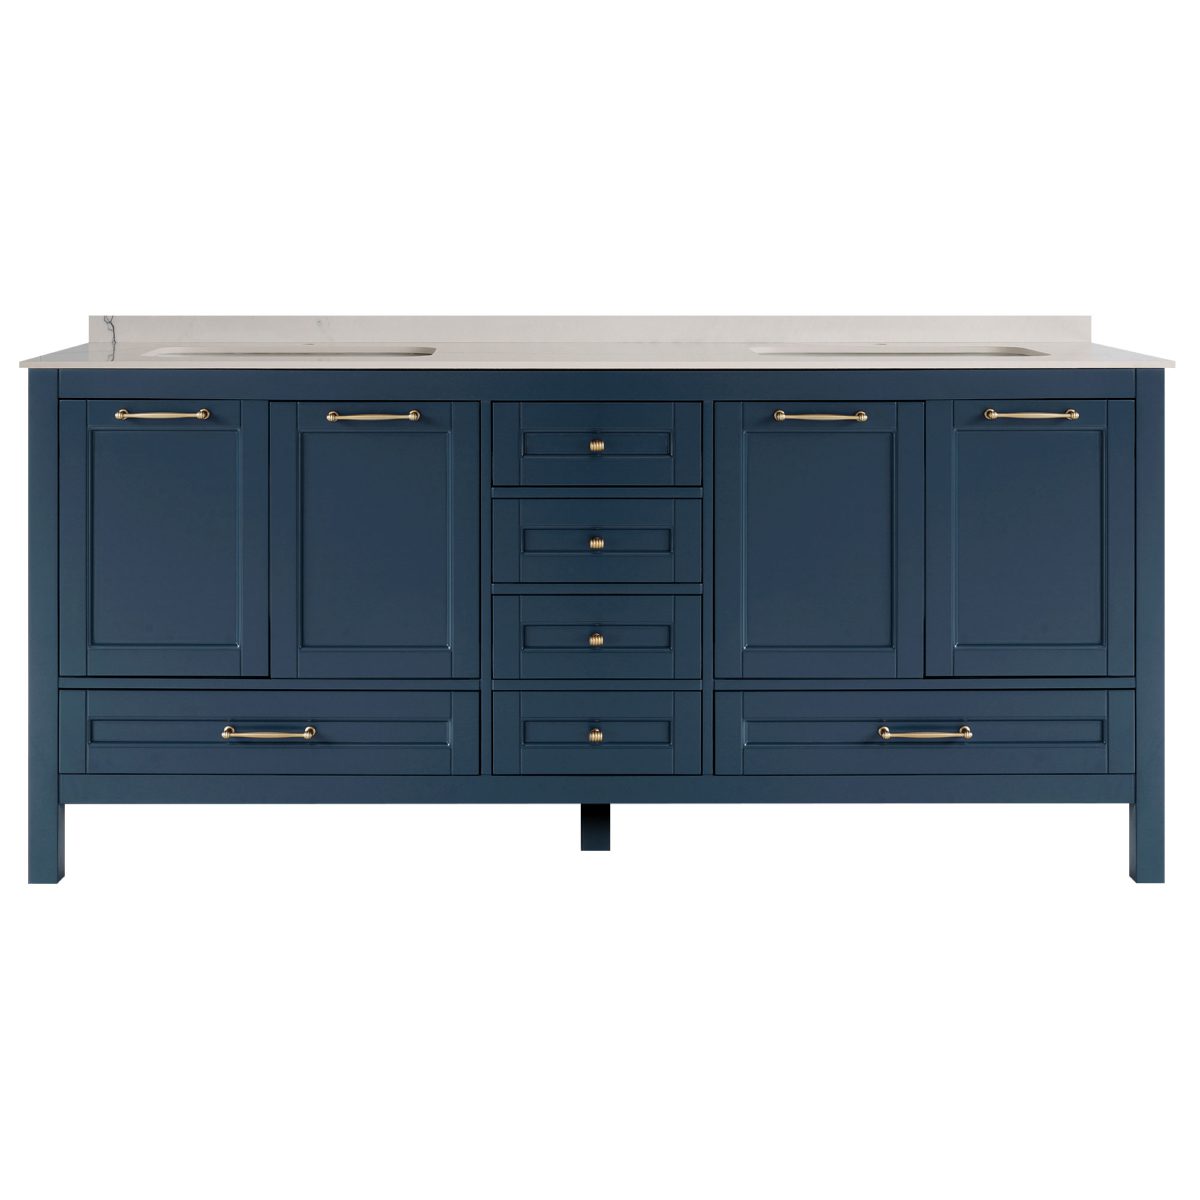 72 inch Navy Blue Double a